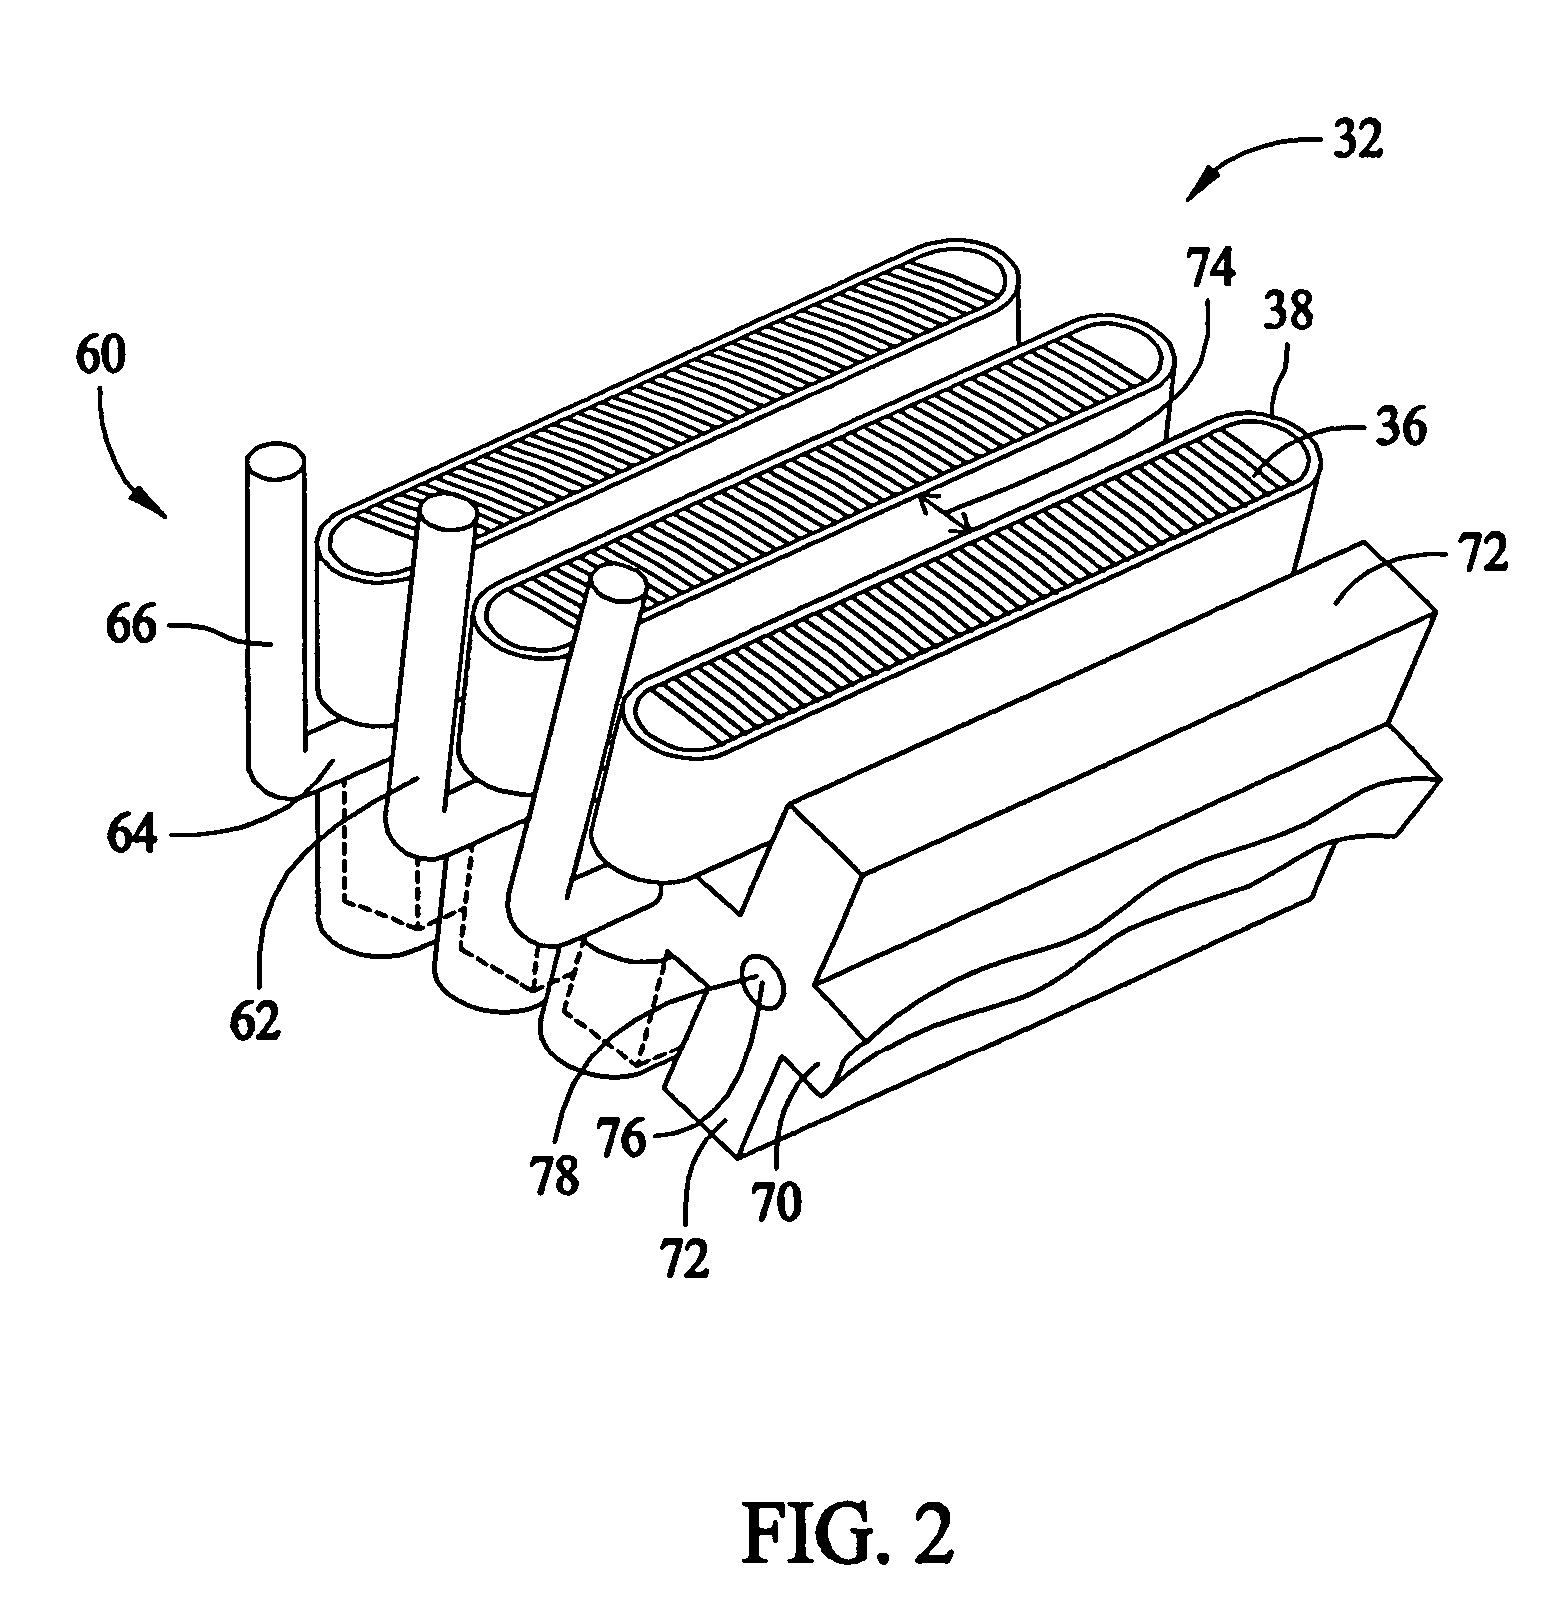 Methods and apparatus for cooling wind turbine generators